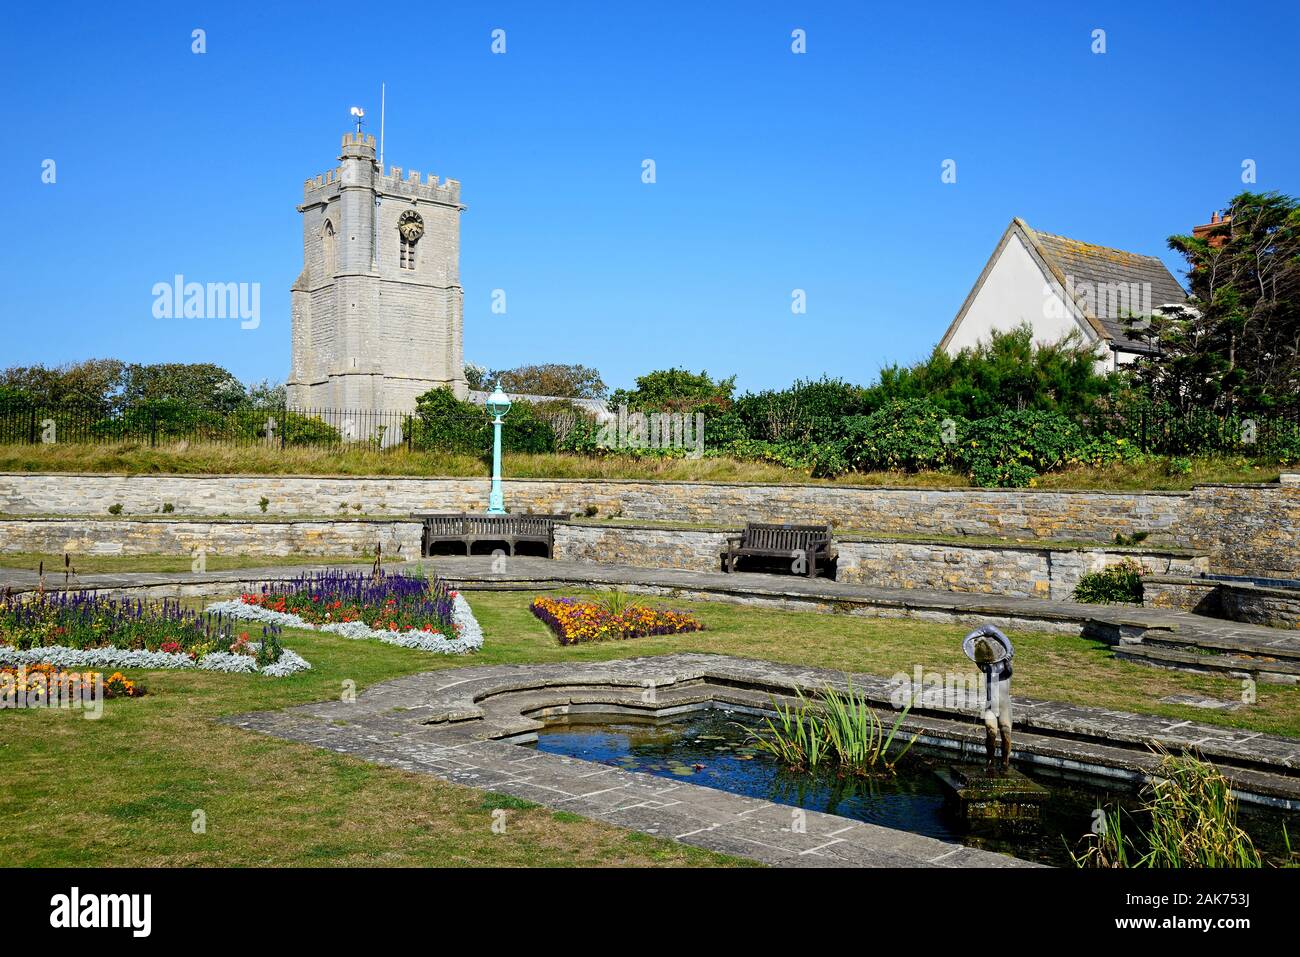 Fountain in the Marine Cove Gardens with St Andrews church to the rear, Burnham-on-Sea, England, UK Stock Photo